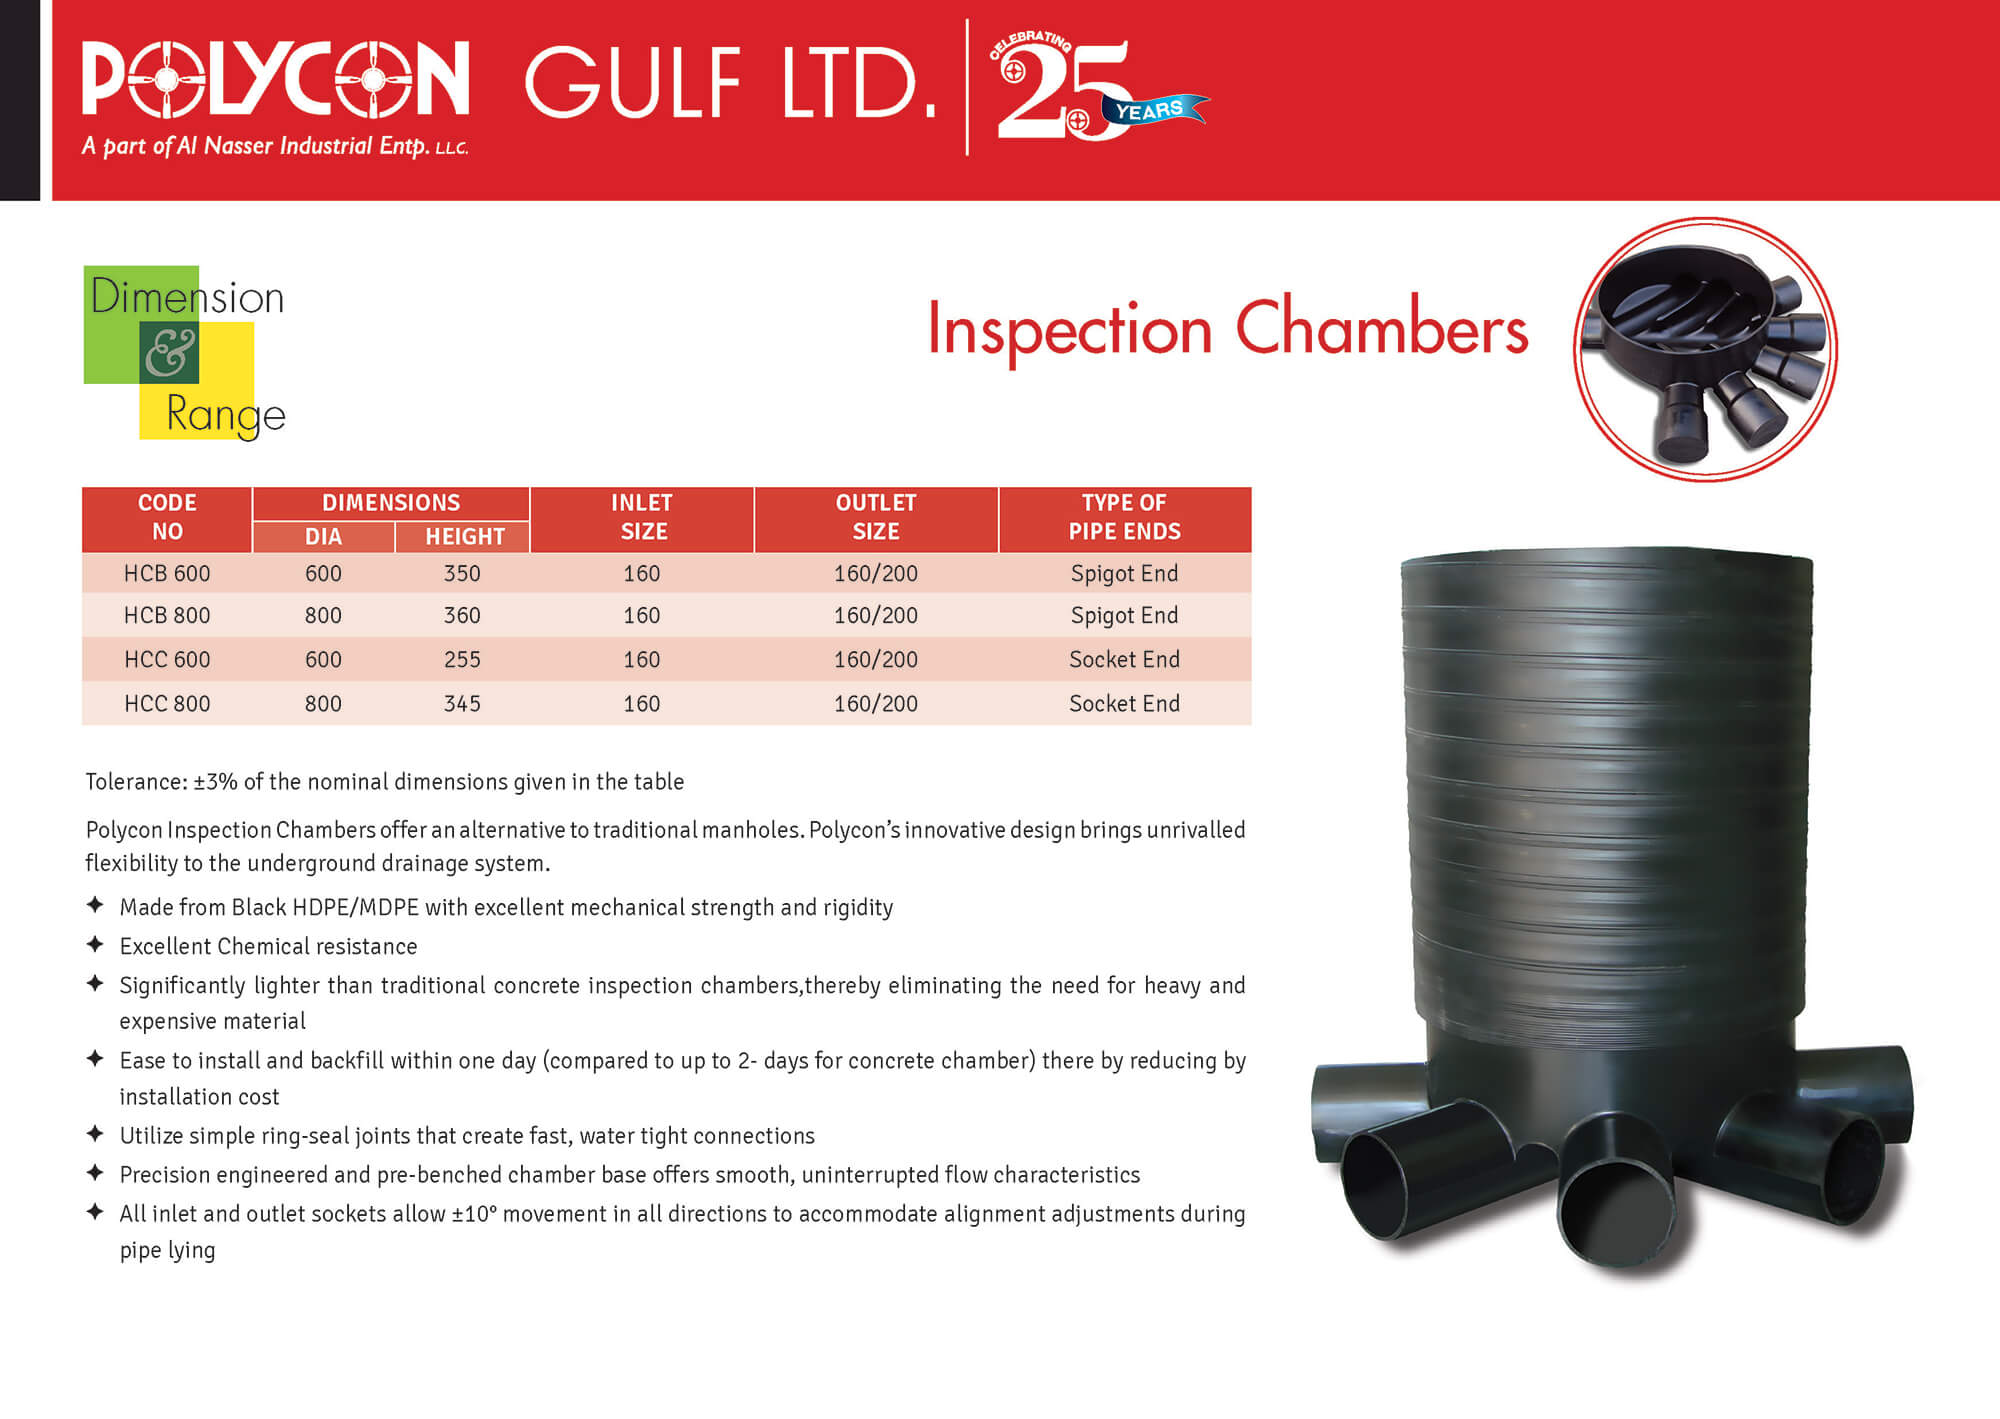 Inspection Chambers